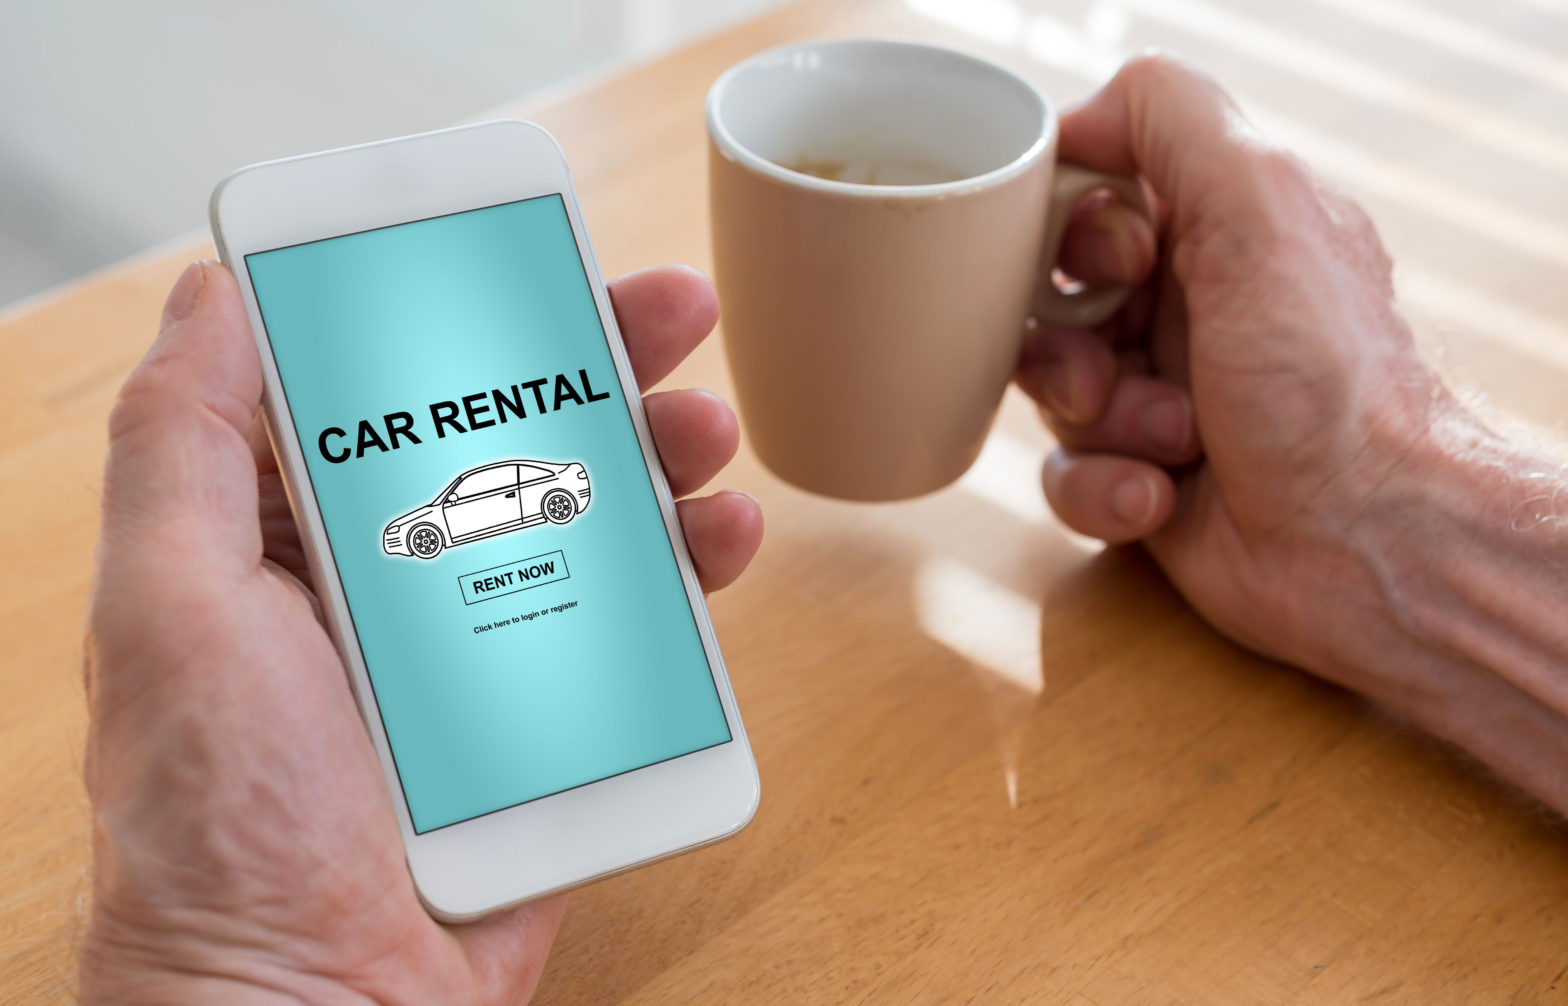 A complete guide to a car reservation software - Jugnoo.io